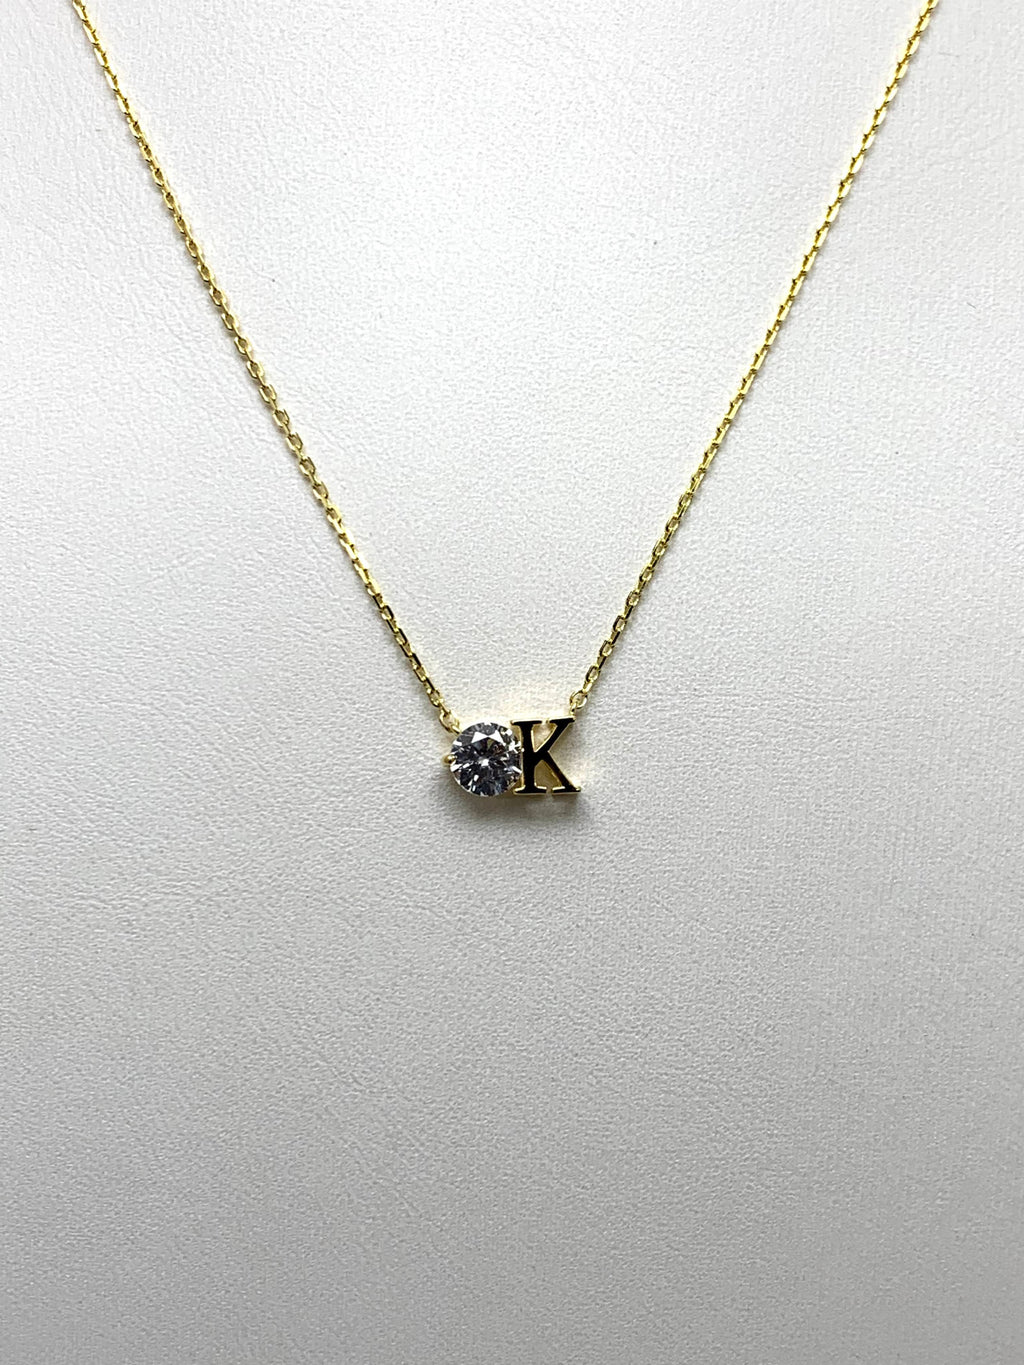 Gold ‘K’ Necklace Swarovski Crystal Letter Initial - Kollection by Kauriel